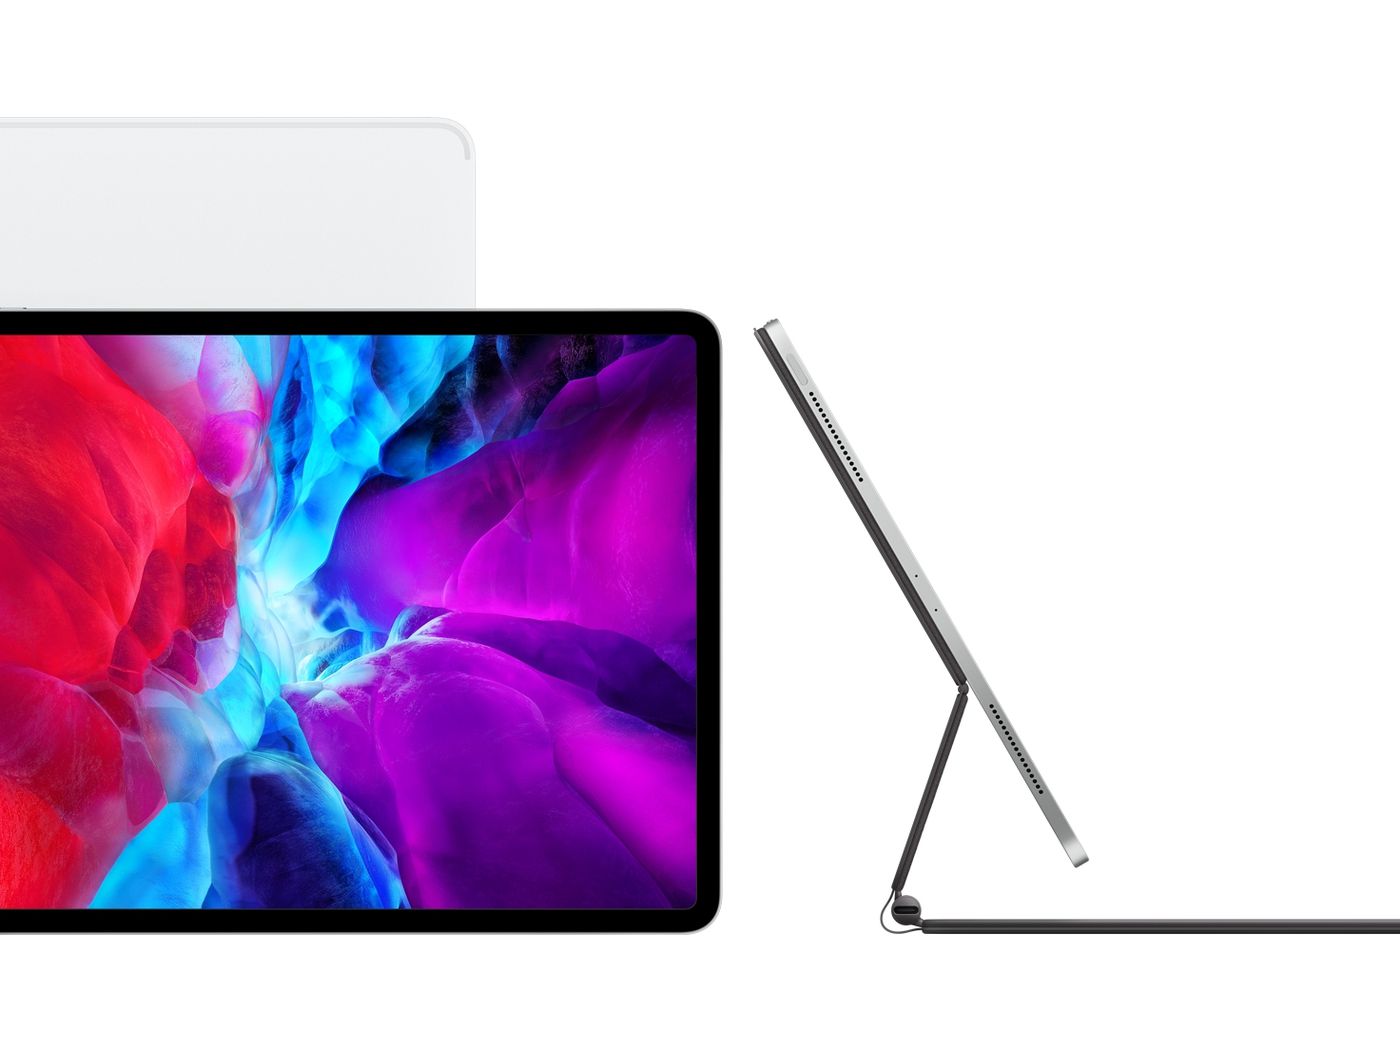 Apple announces new iPad Pro with trackpad support and a wild